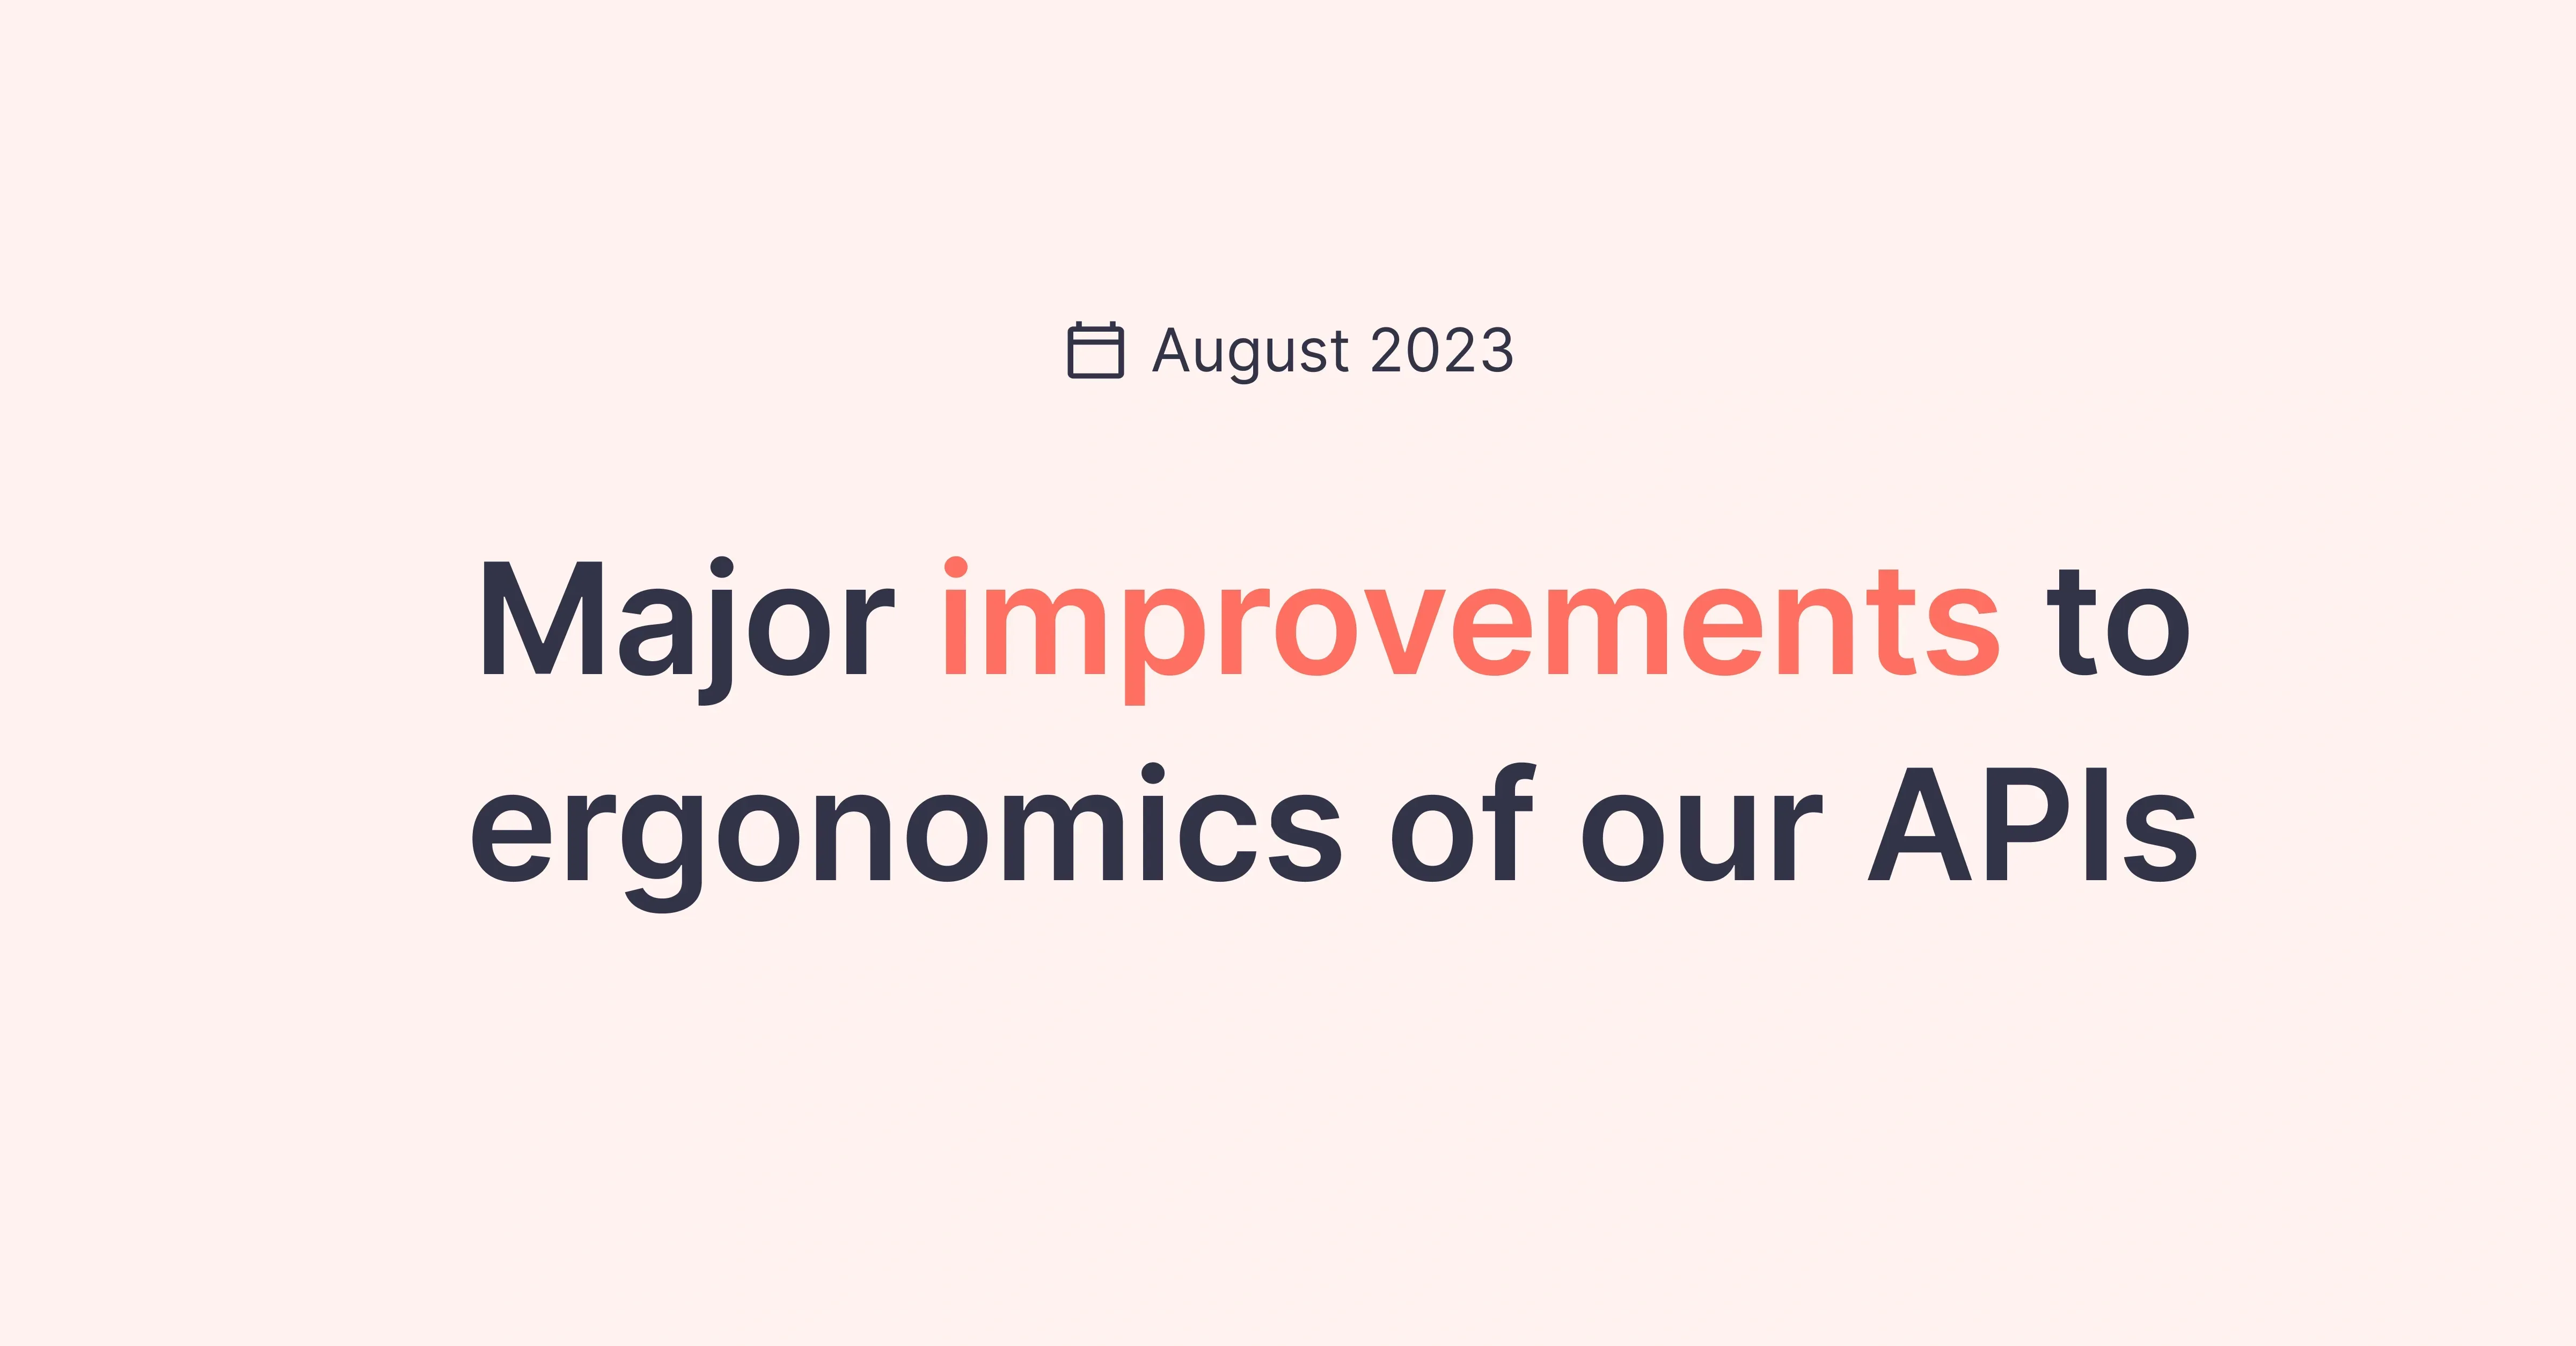 Title picture for Major improvements to our API ergonomics (August 2023)